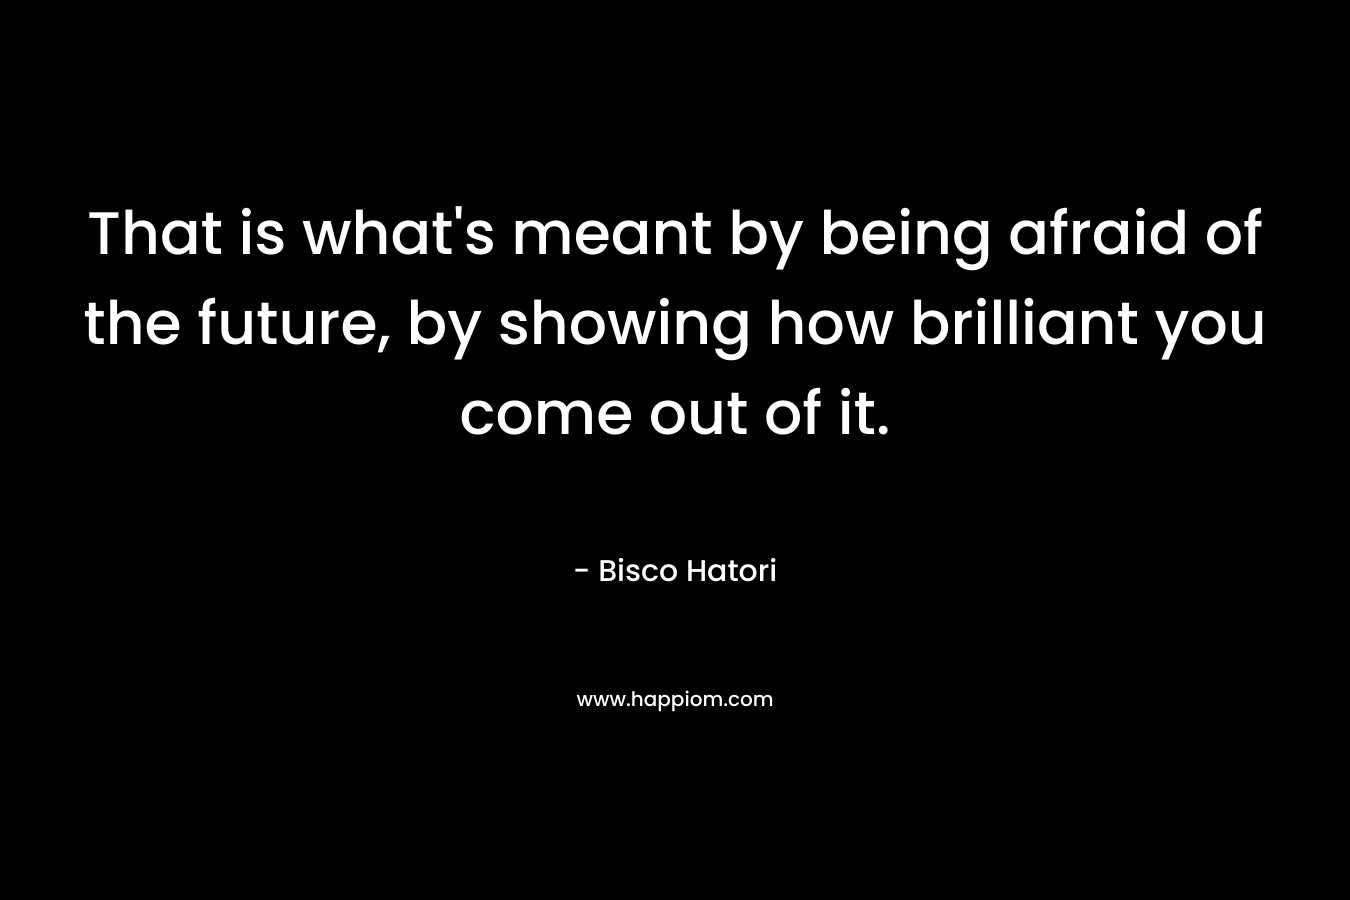 That is what’s meant by being afraid of the future, by showing how brilliant you come out of it. – Bisco Hatori